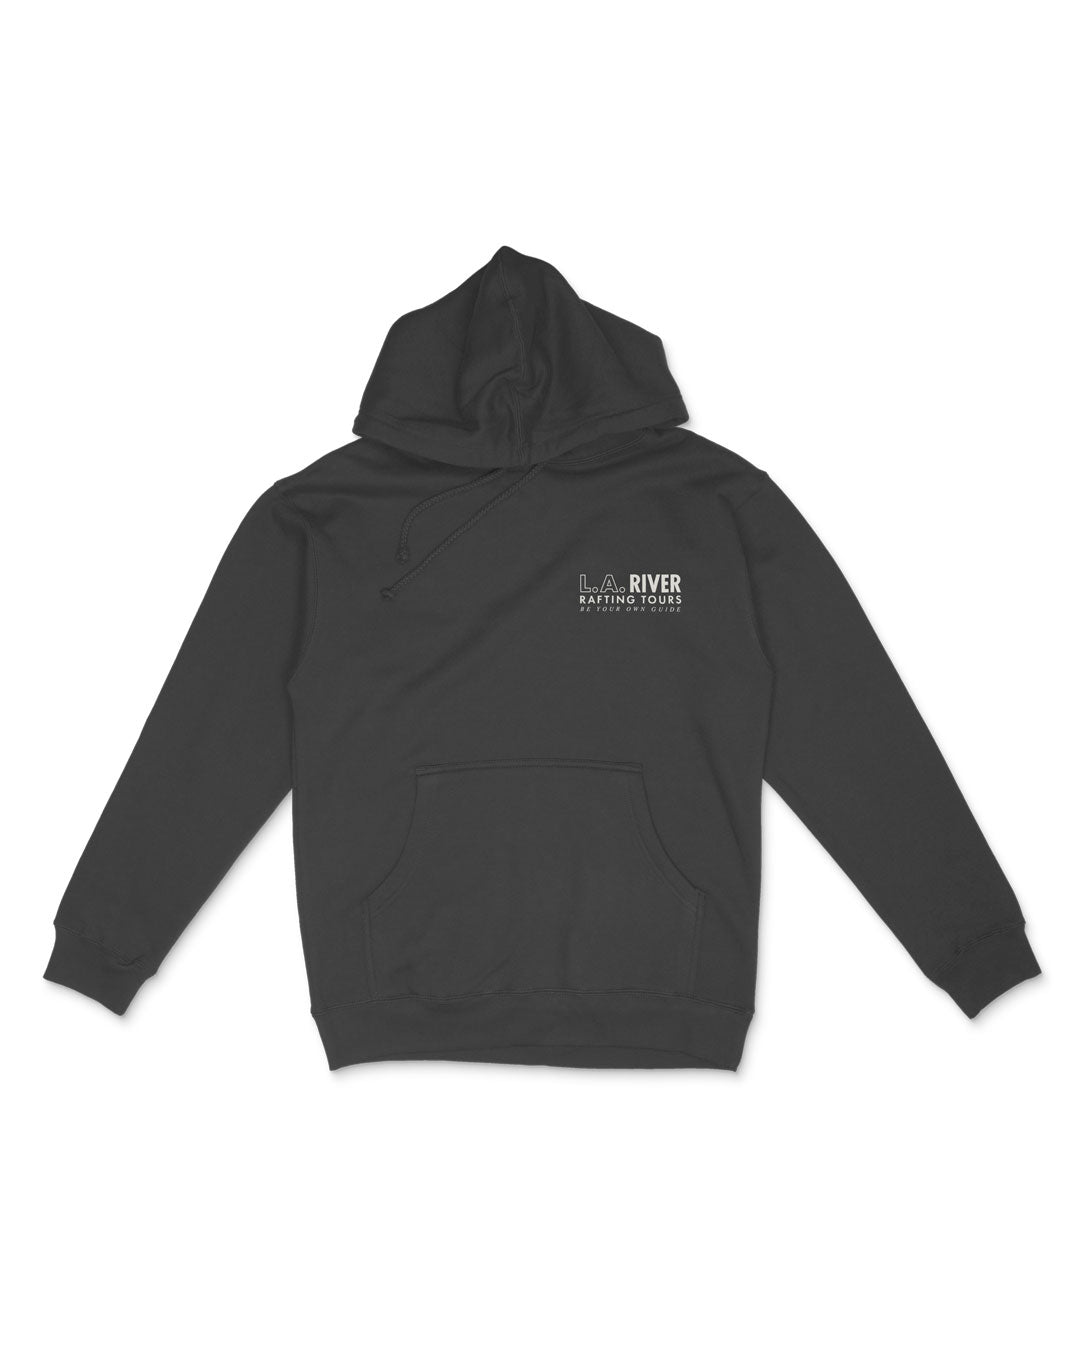 LA River Rafting Tours Graphic Pullover Hoodie